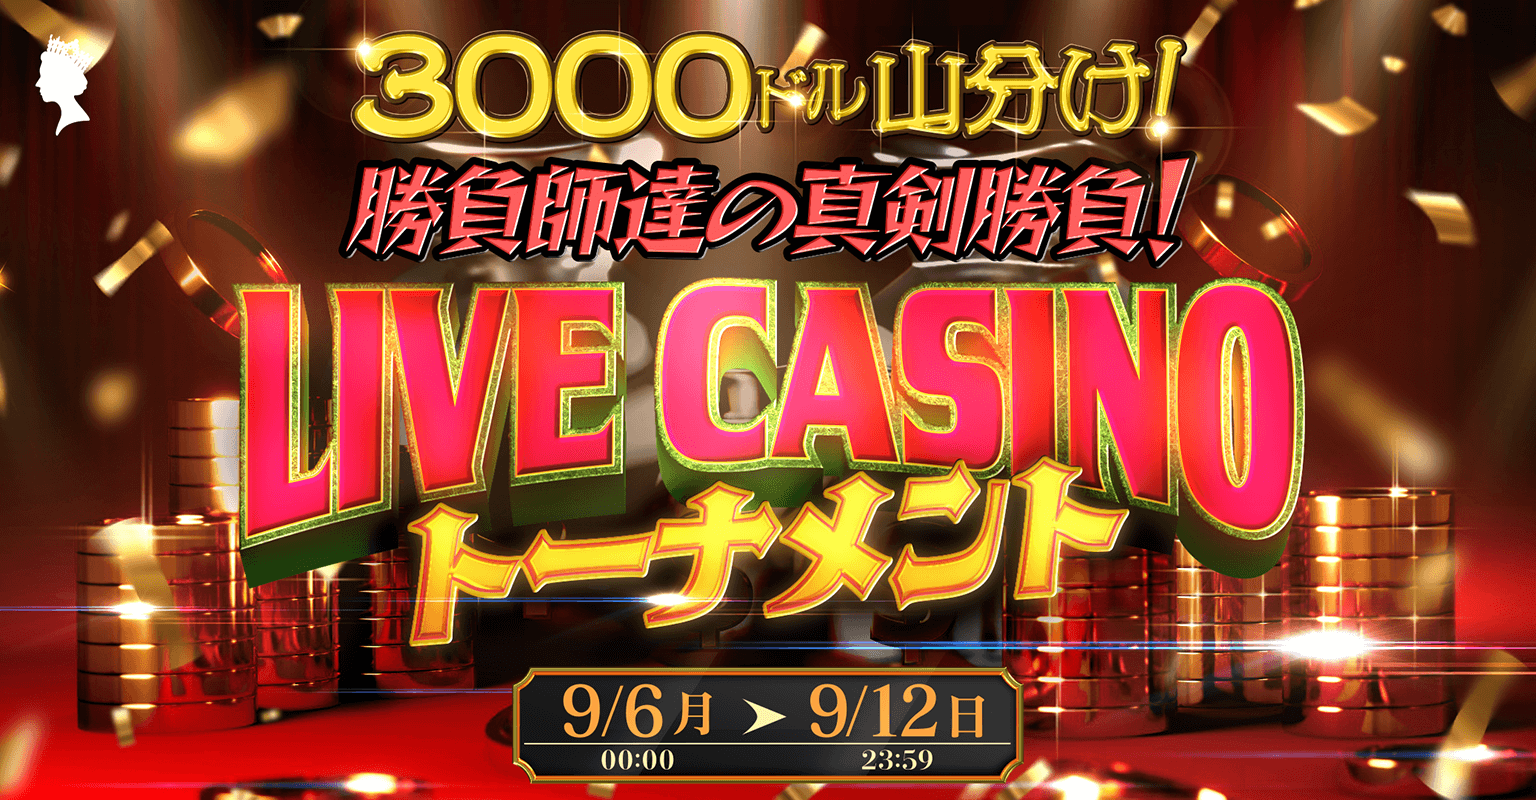 During the campaign period, the top 30 players who played Baccarat and Roulette at the live casino tournament will receive $3,000.